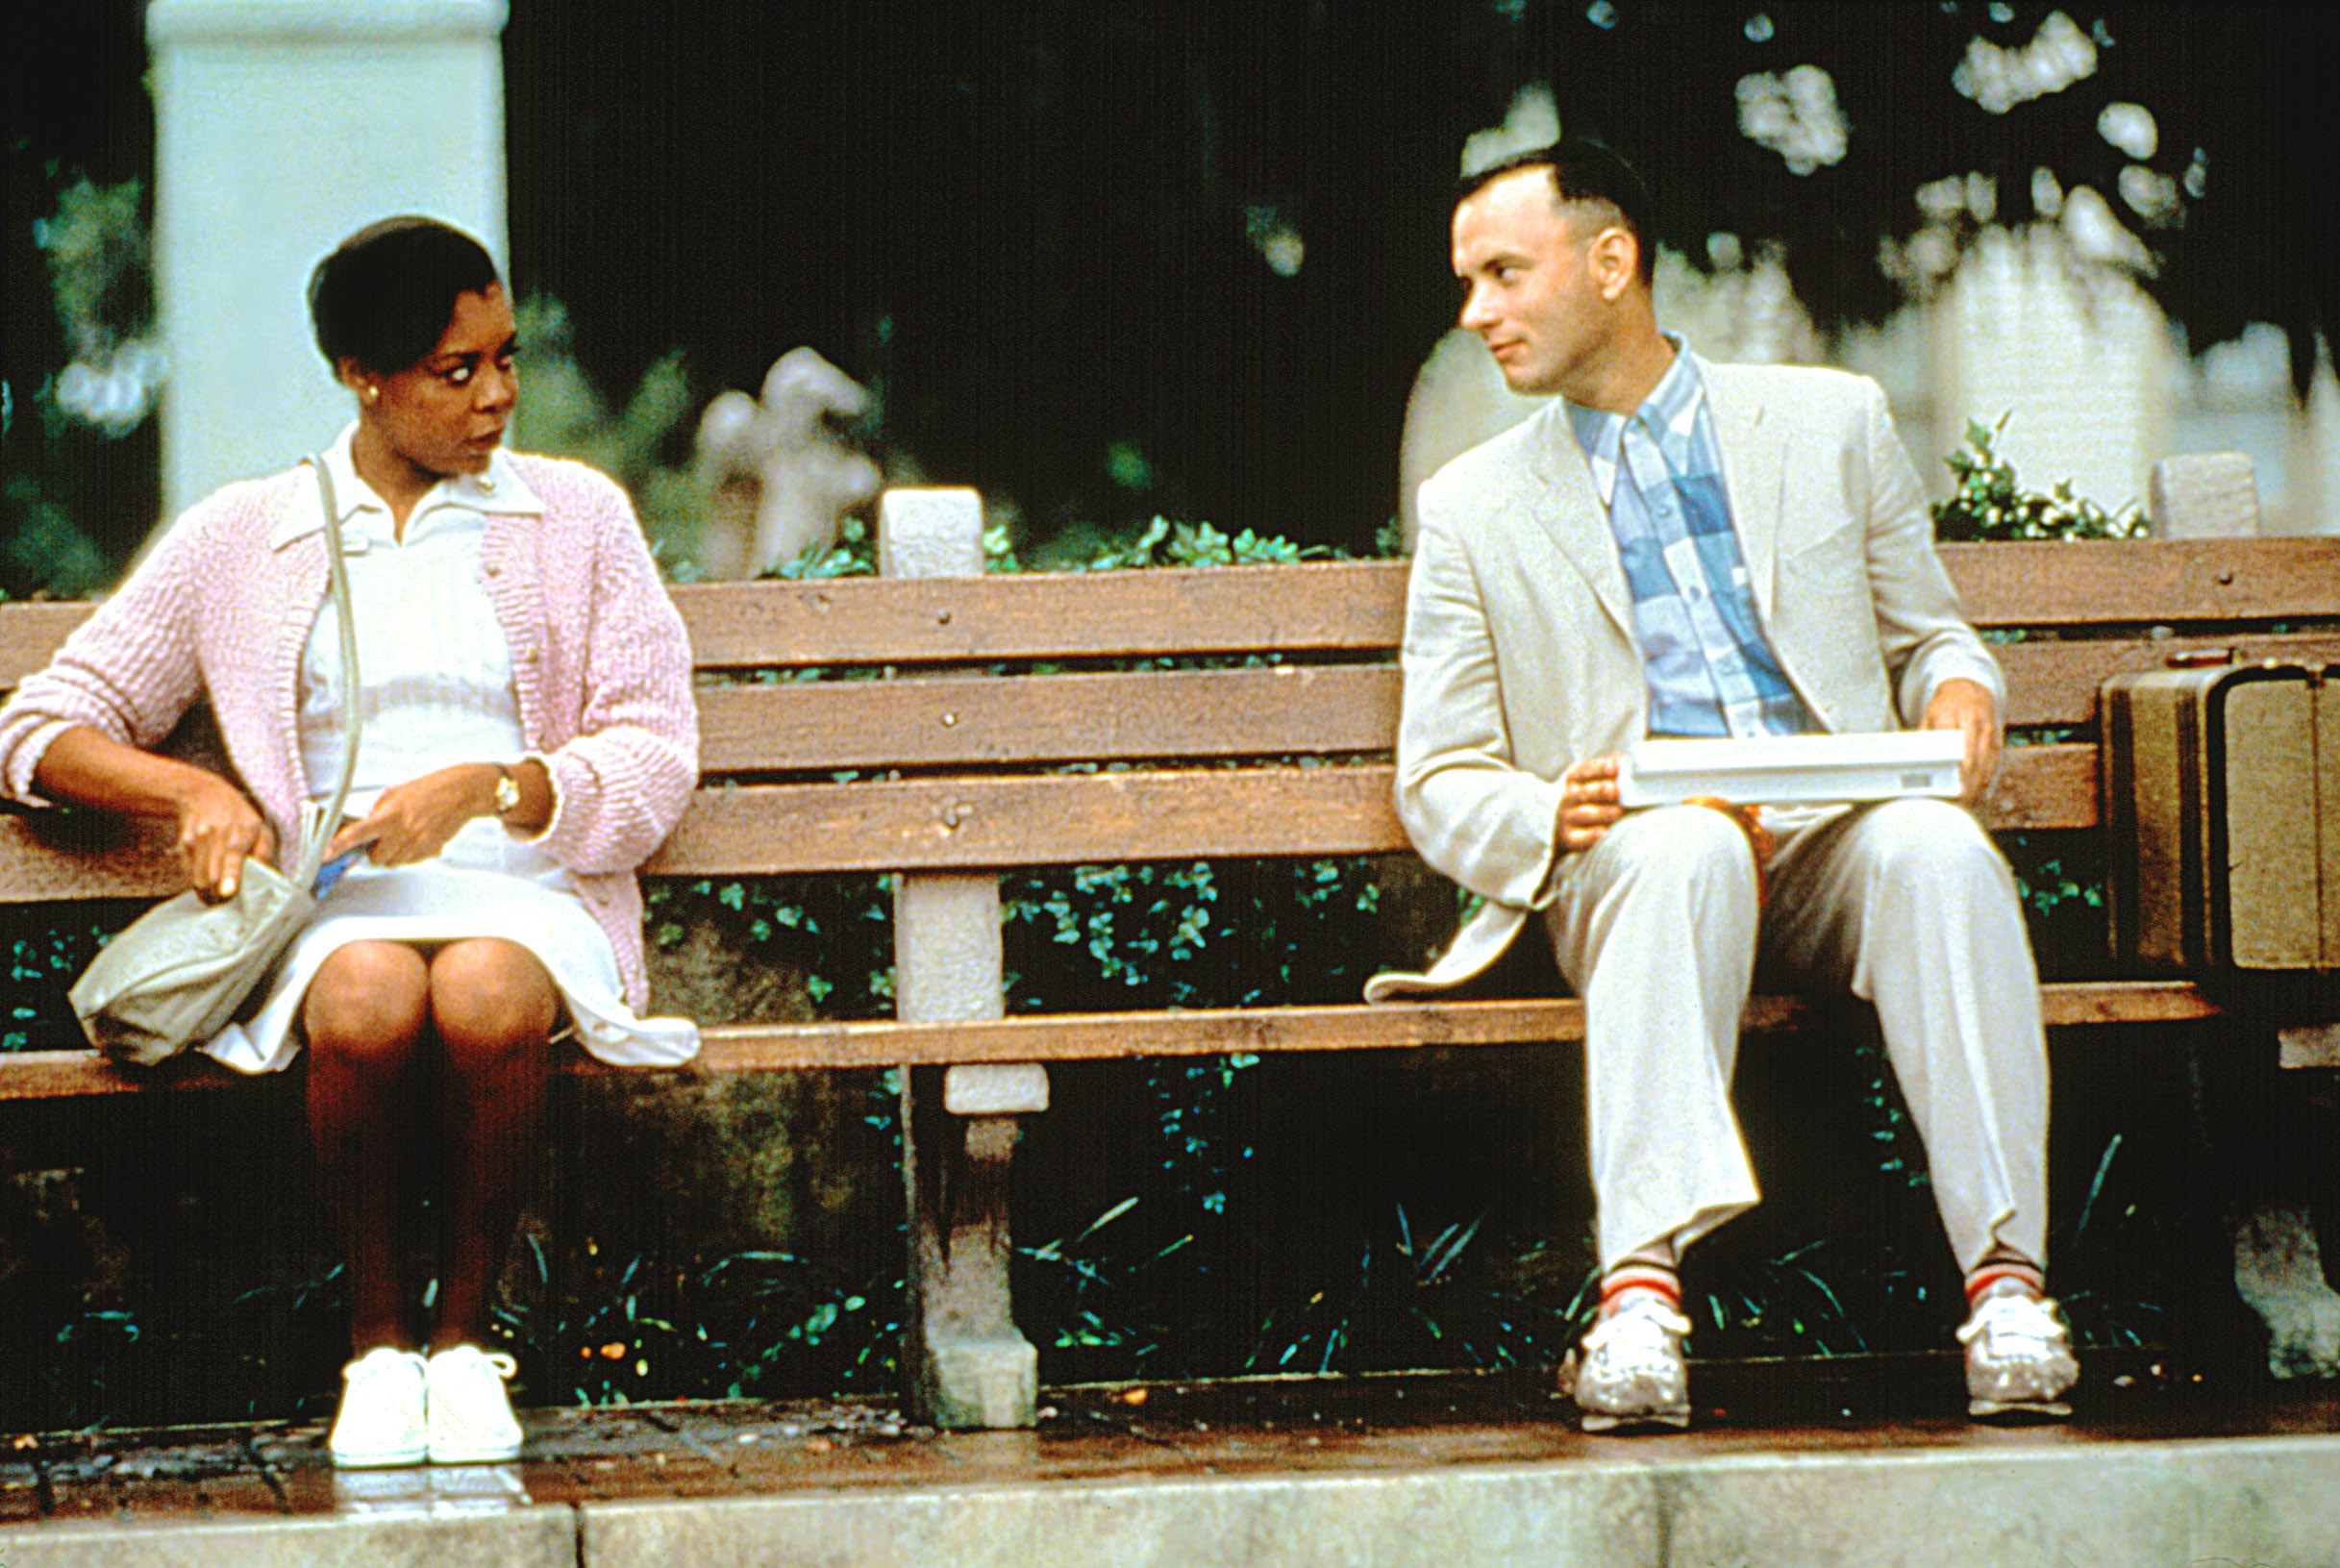 Rebecca Williams and Tom Hanks sit on a bench together